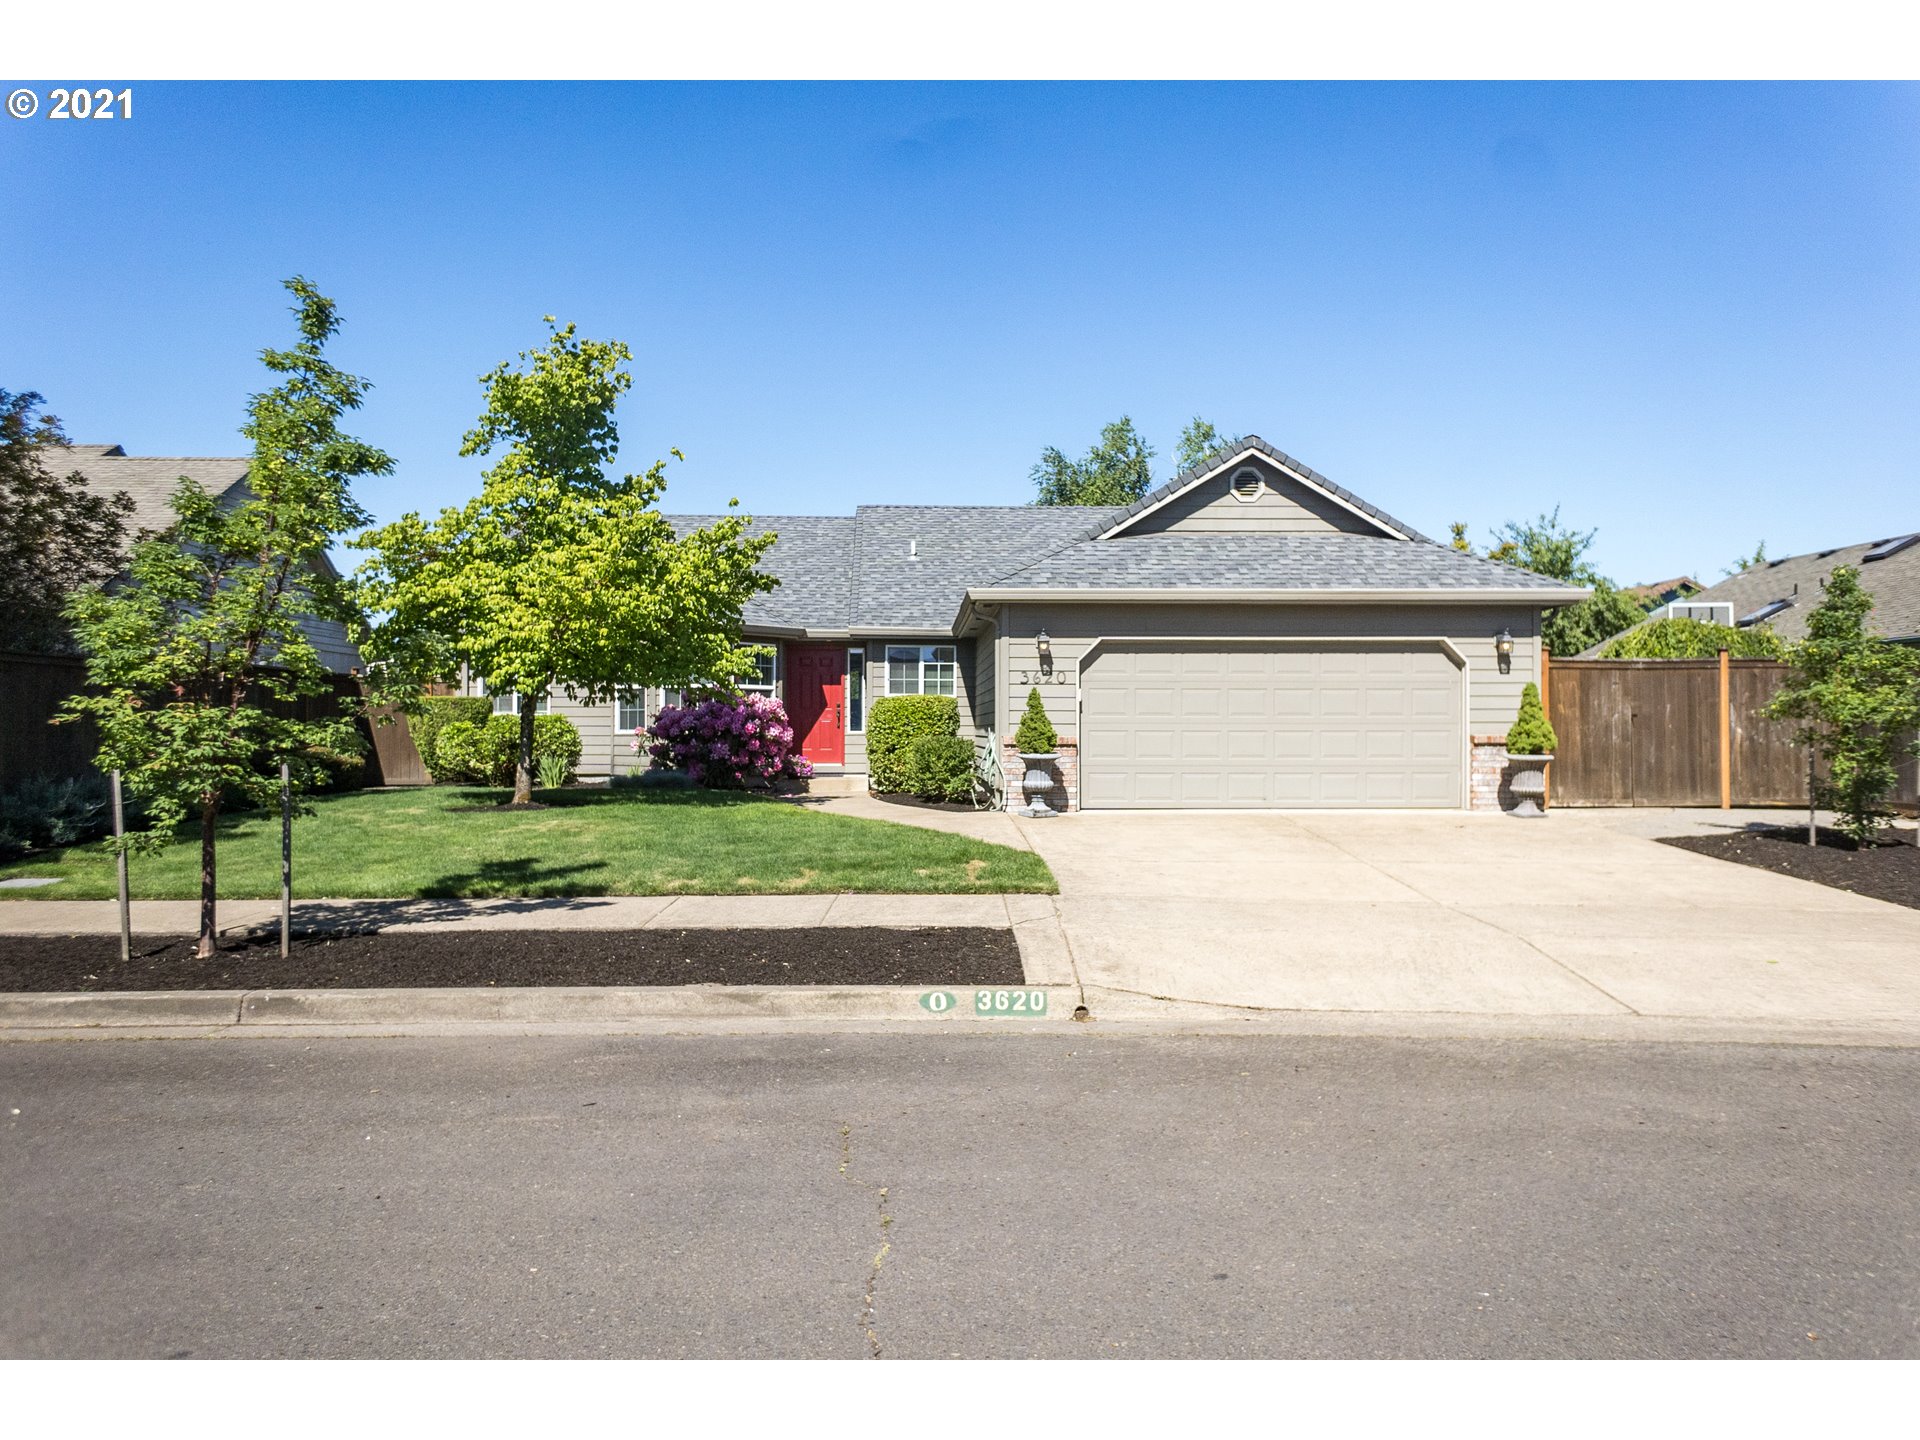 3620 BERKSHIRE ST Eugene Home Listings - Galand Haas Real Estate